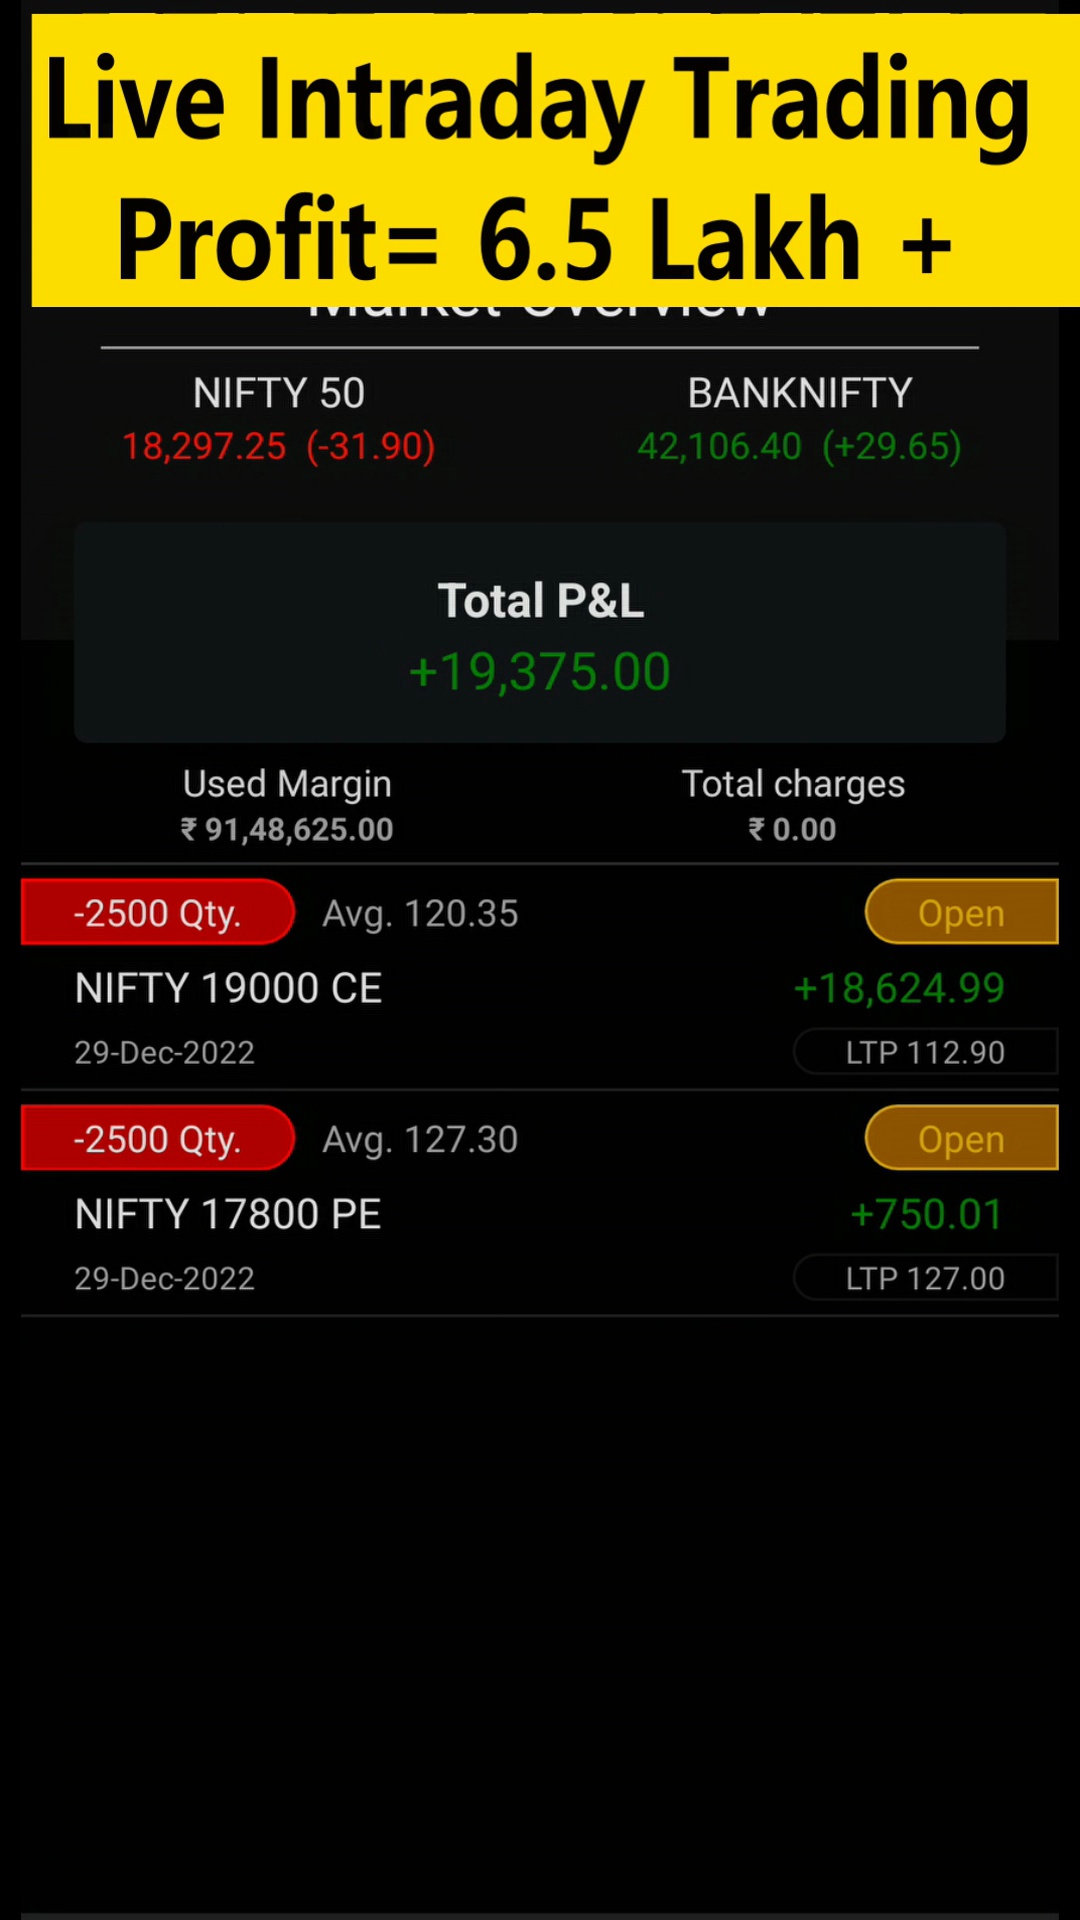 Live Intraday Trading | Nifty and Bank Nifty markets | Live Intraday Profit = 6.5 Lakh